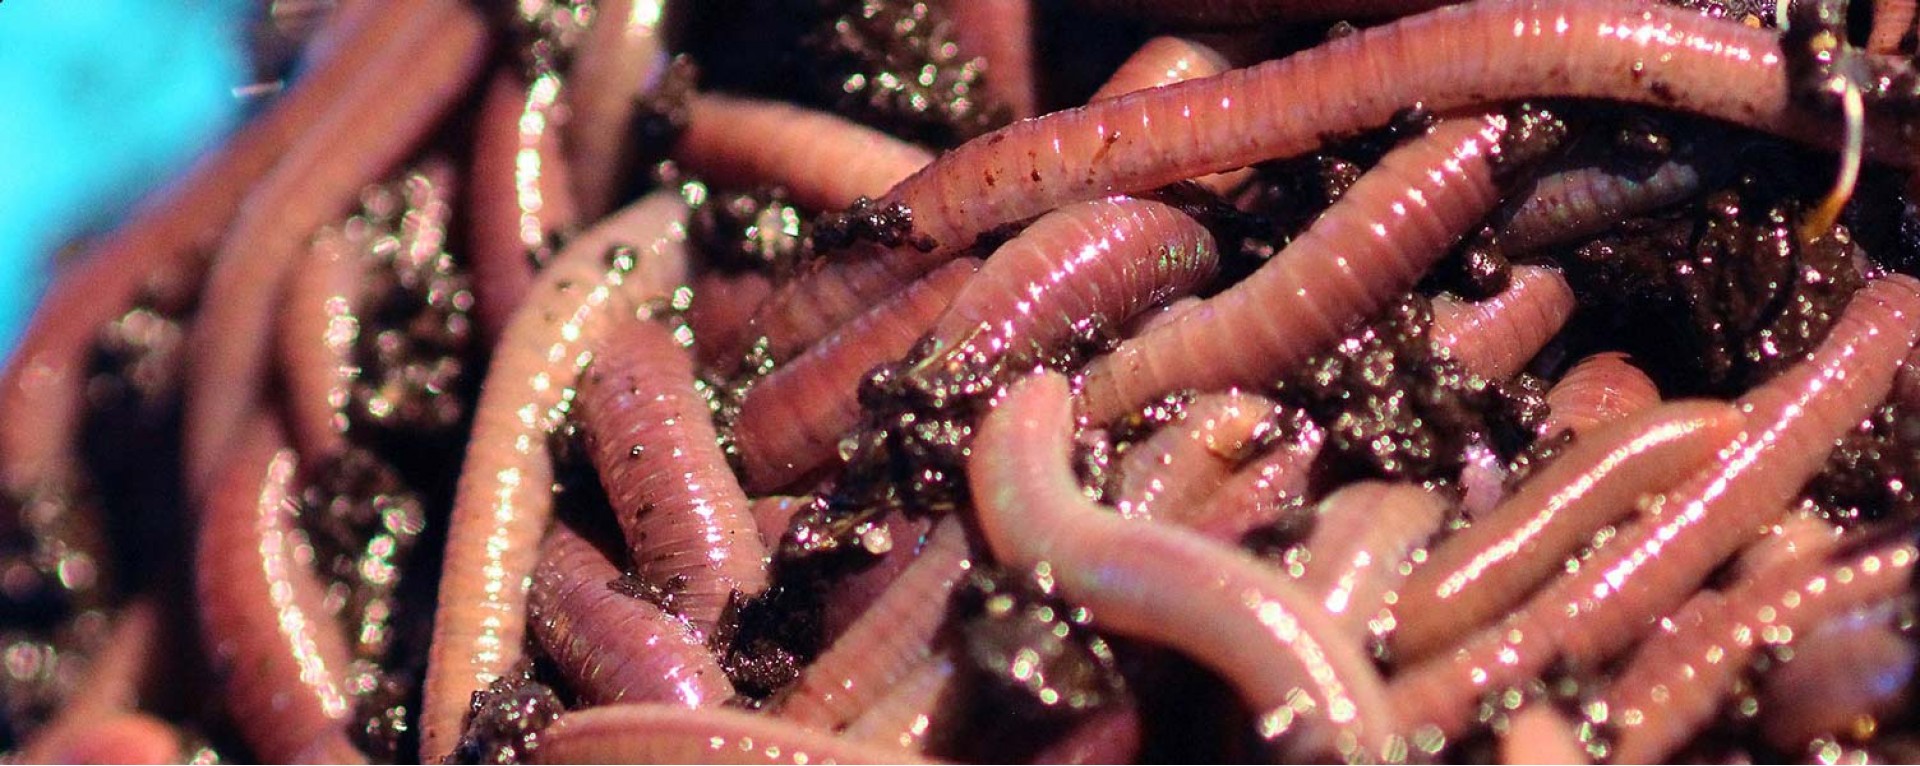 Composting and Garden Worms for Sale  Largest Selection of Worms and  Supplies Online!